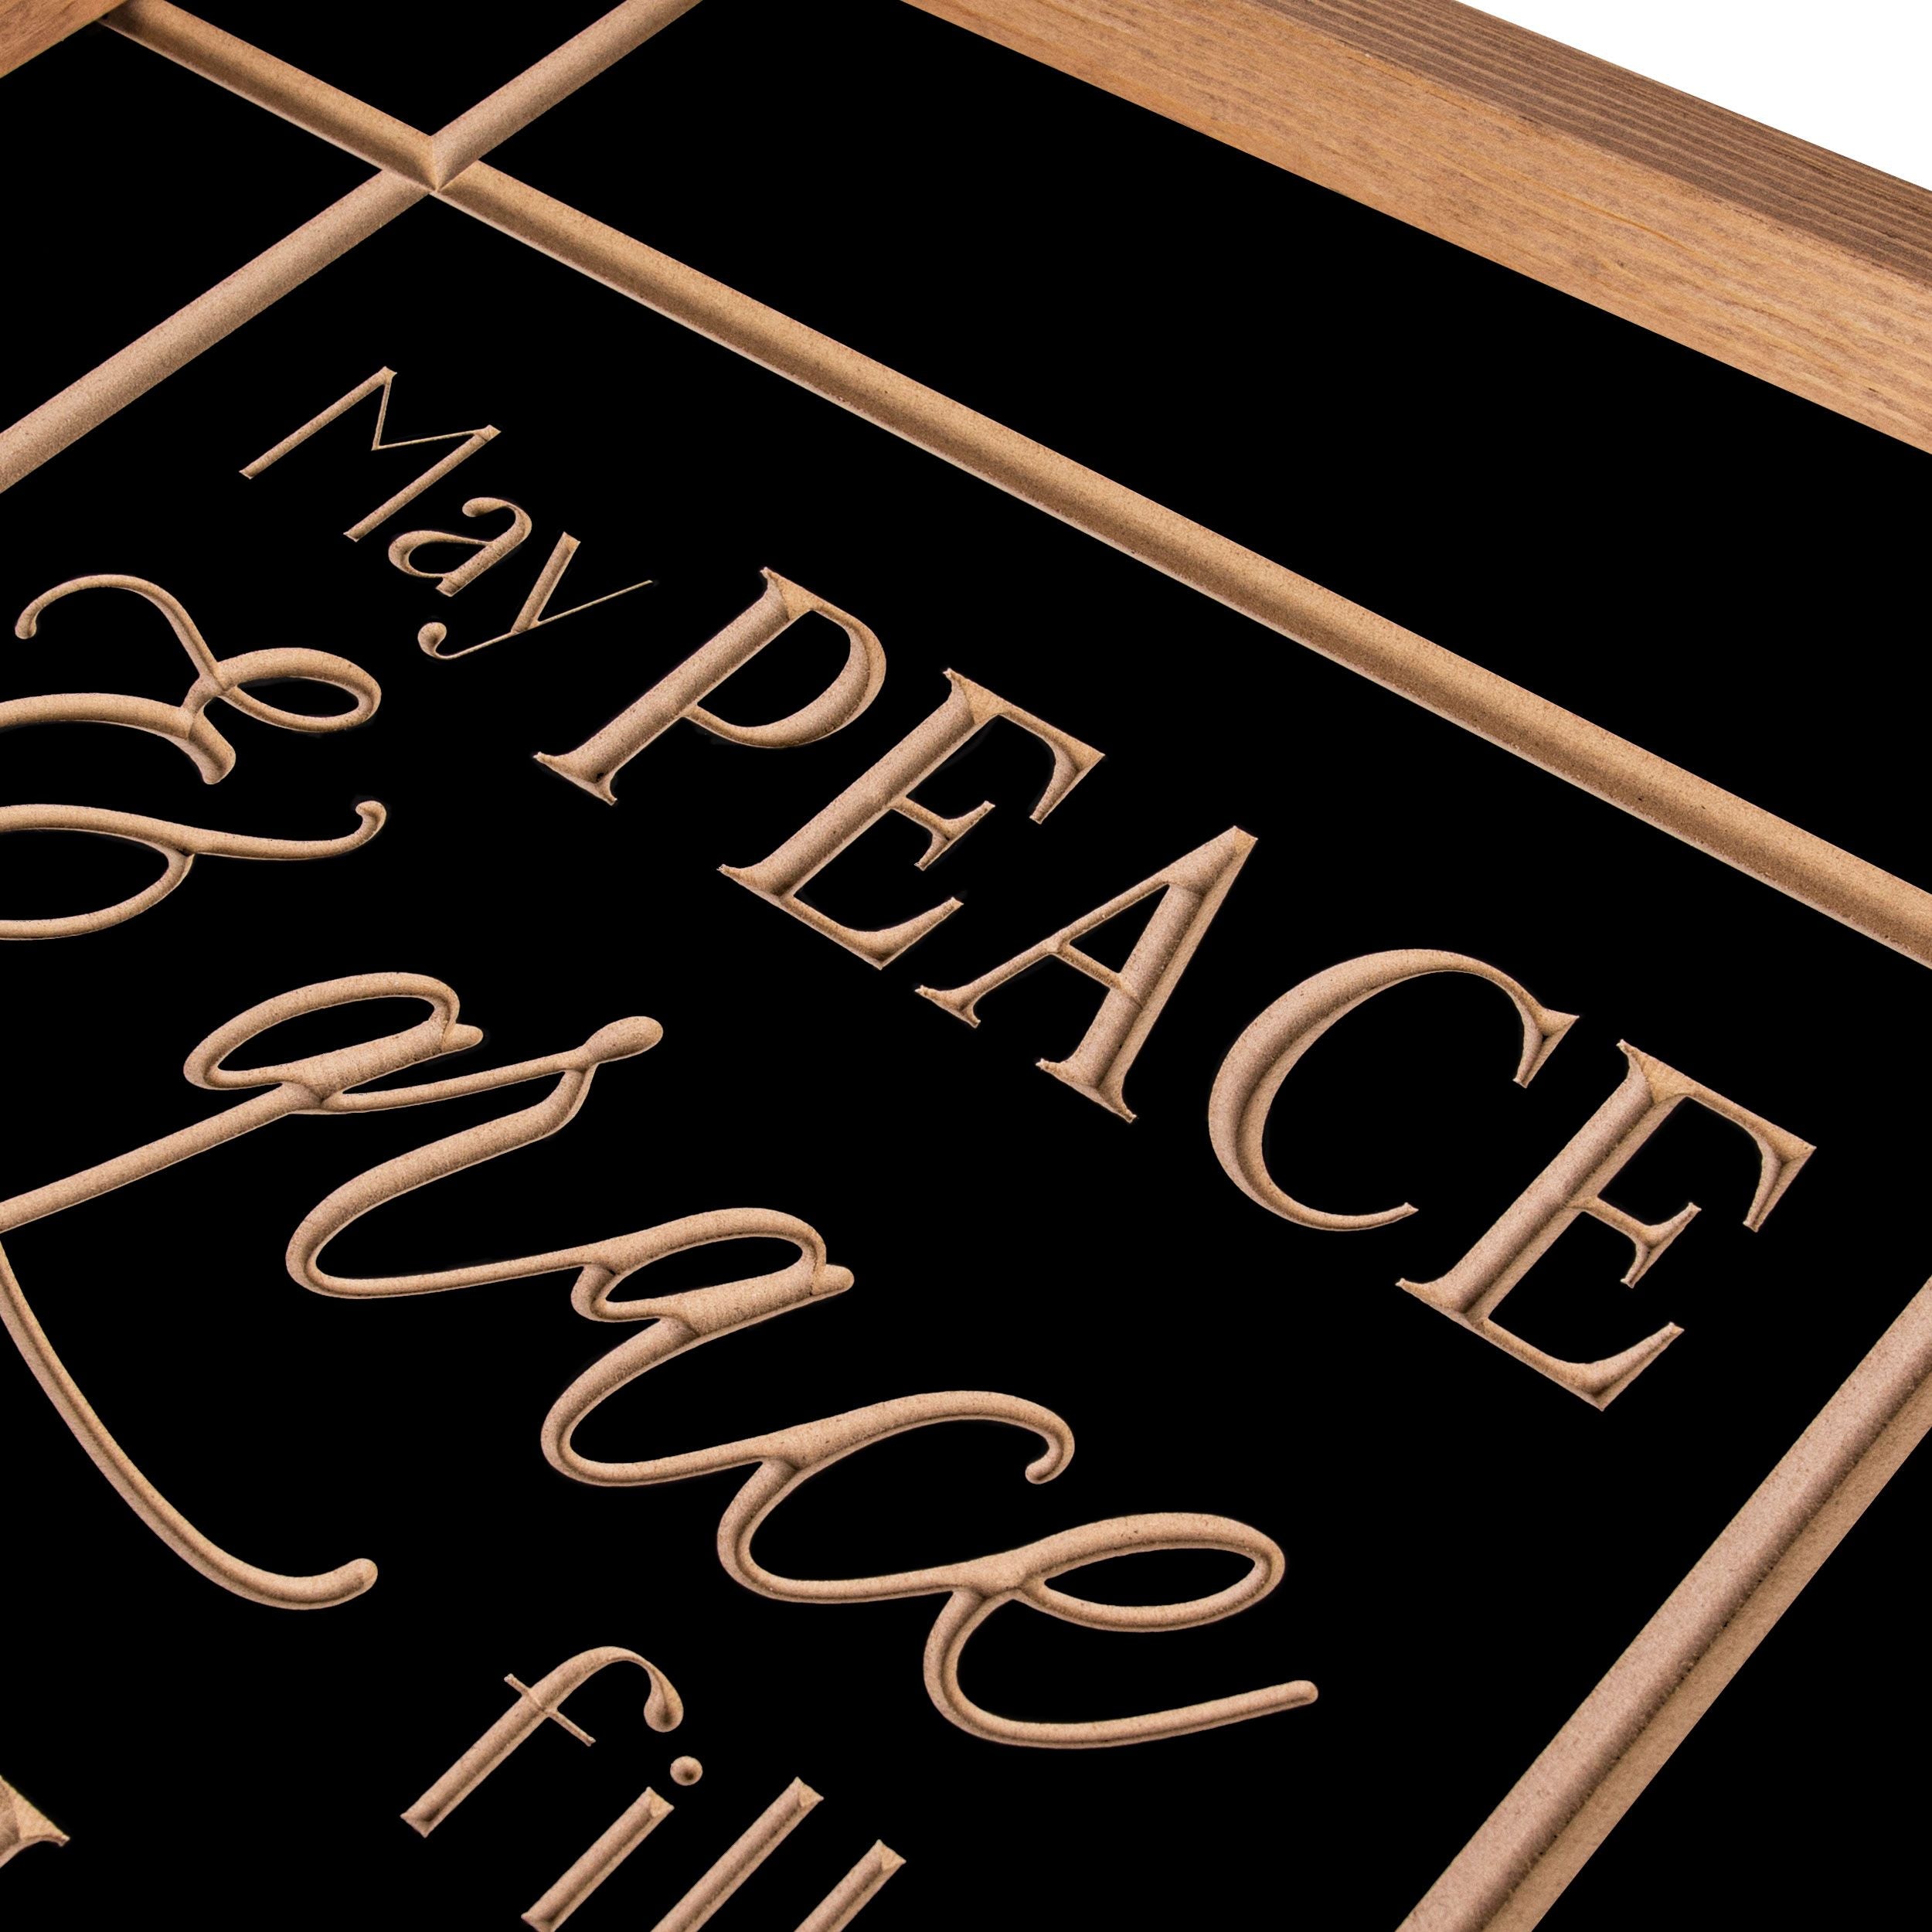 May Peace And Grace Fill This Place Framed Art